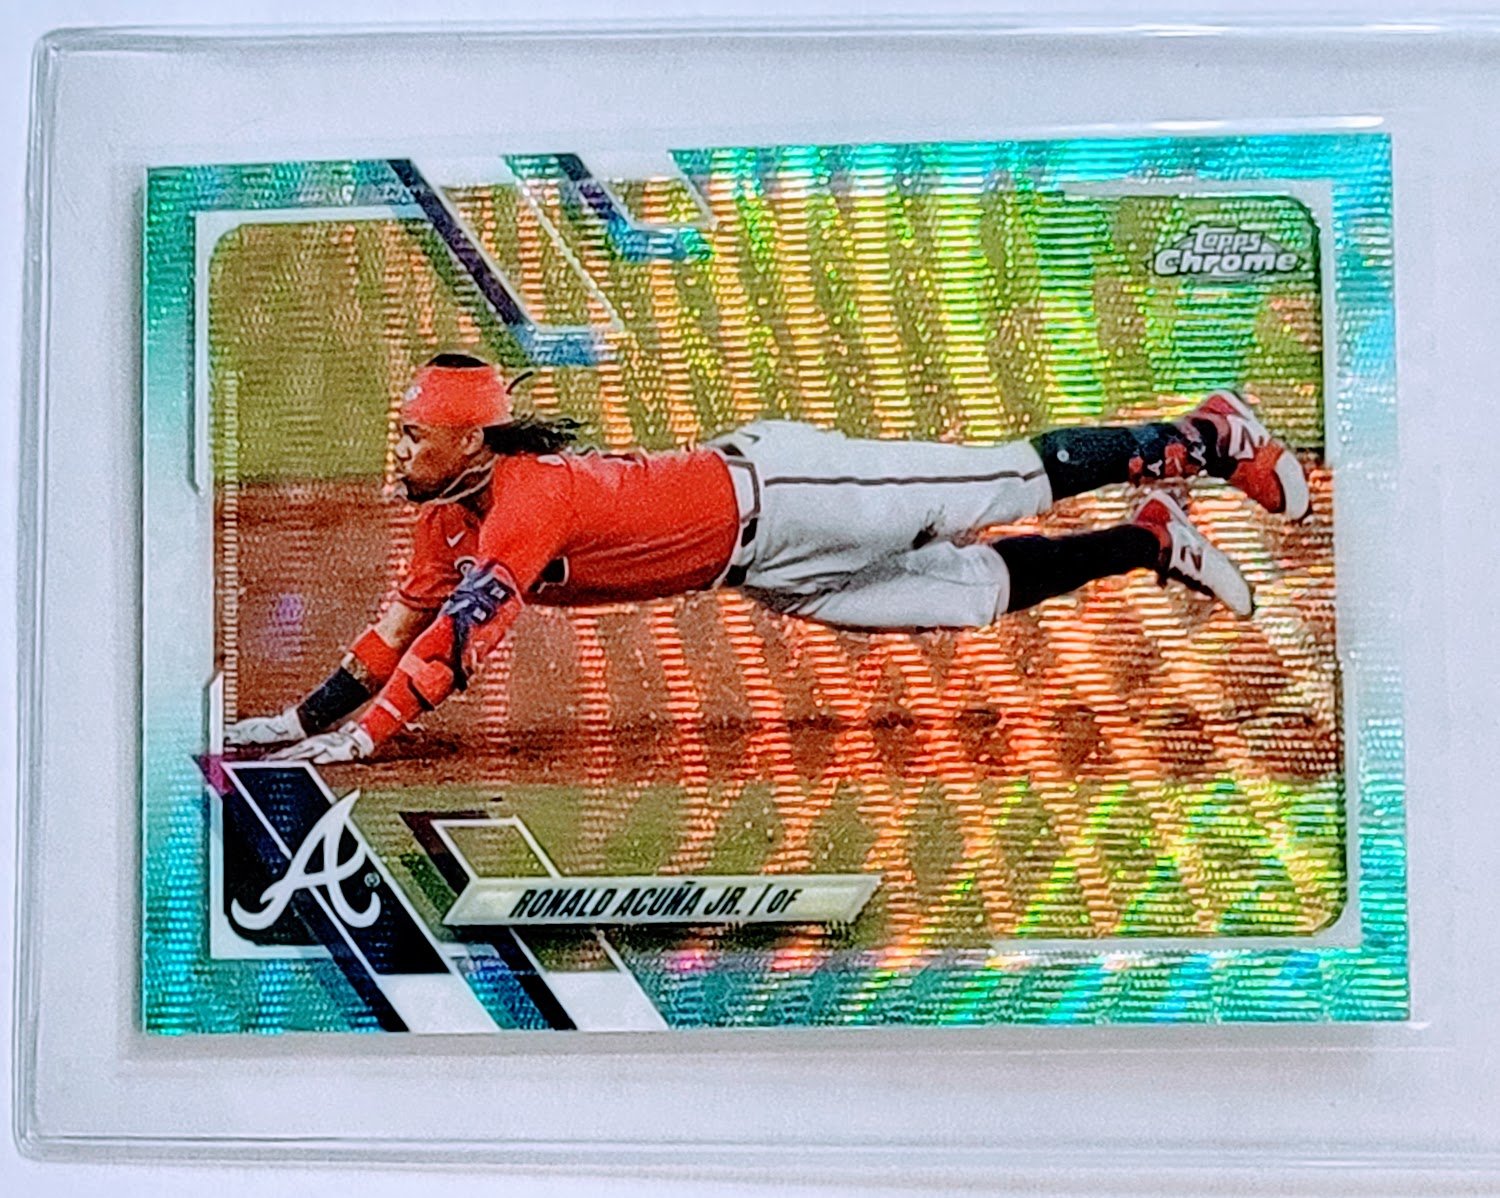 2021 Topps Chrome Ronald Acuna Jr Blue #'d/199 Hyper Refractor Baseball Trading Card TPTV simple Xclusive Collectibles   